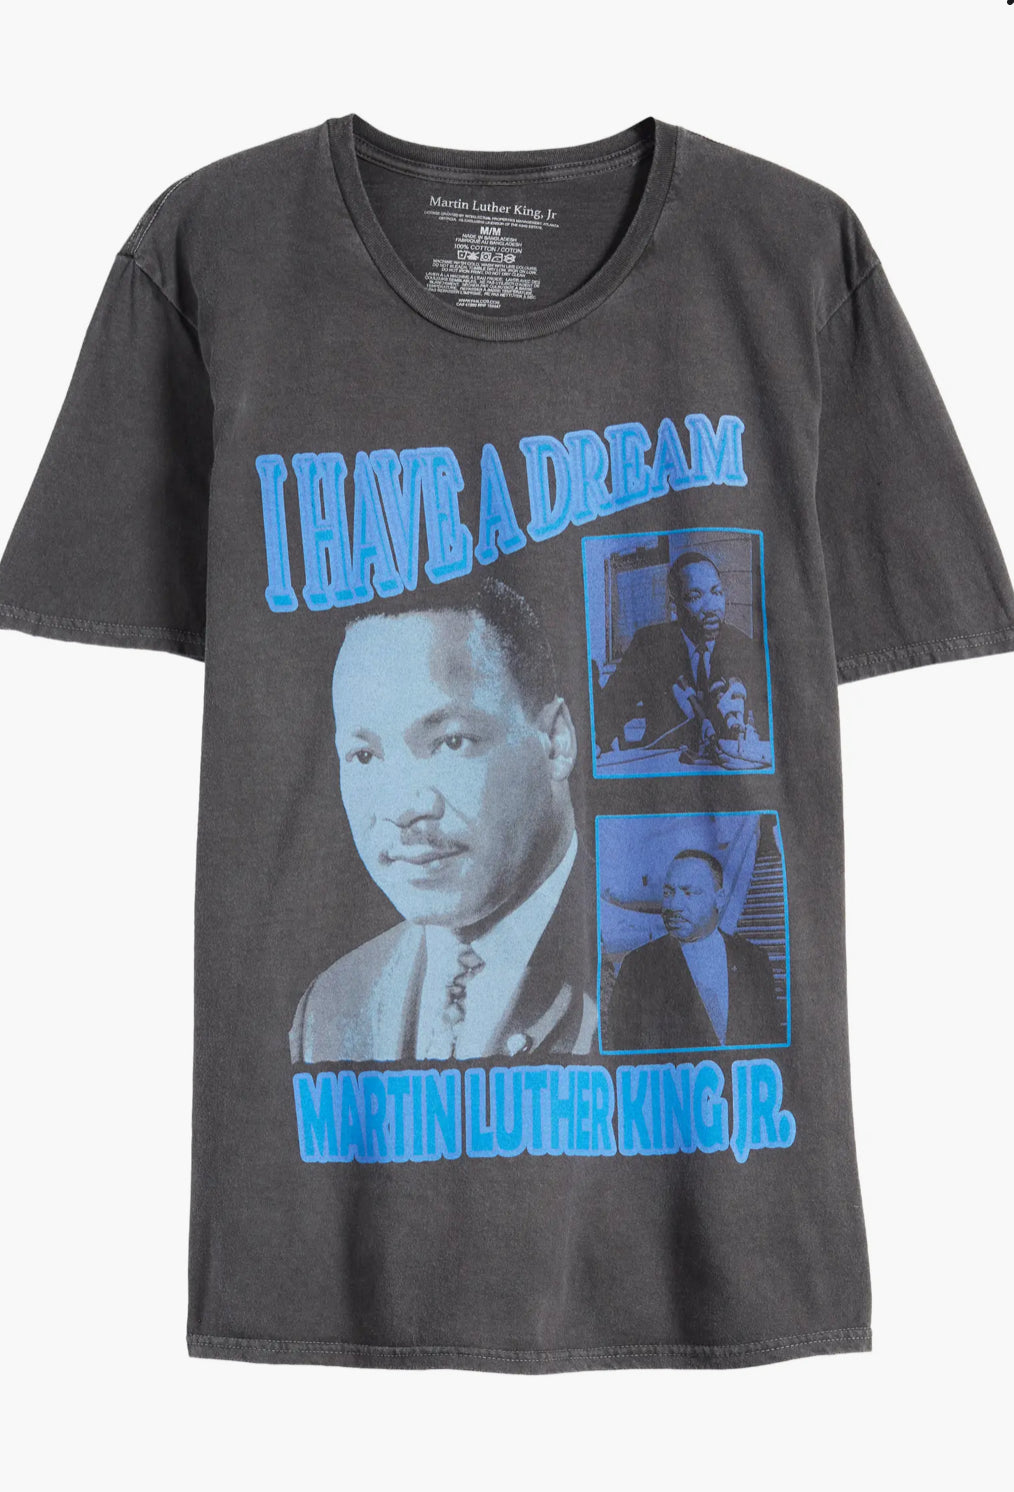 Martin The King I Have a Dream Tee (as worn by Claire)